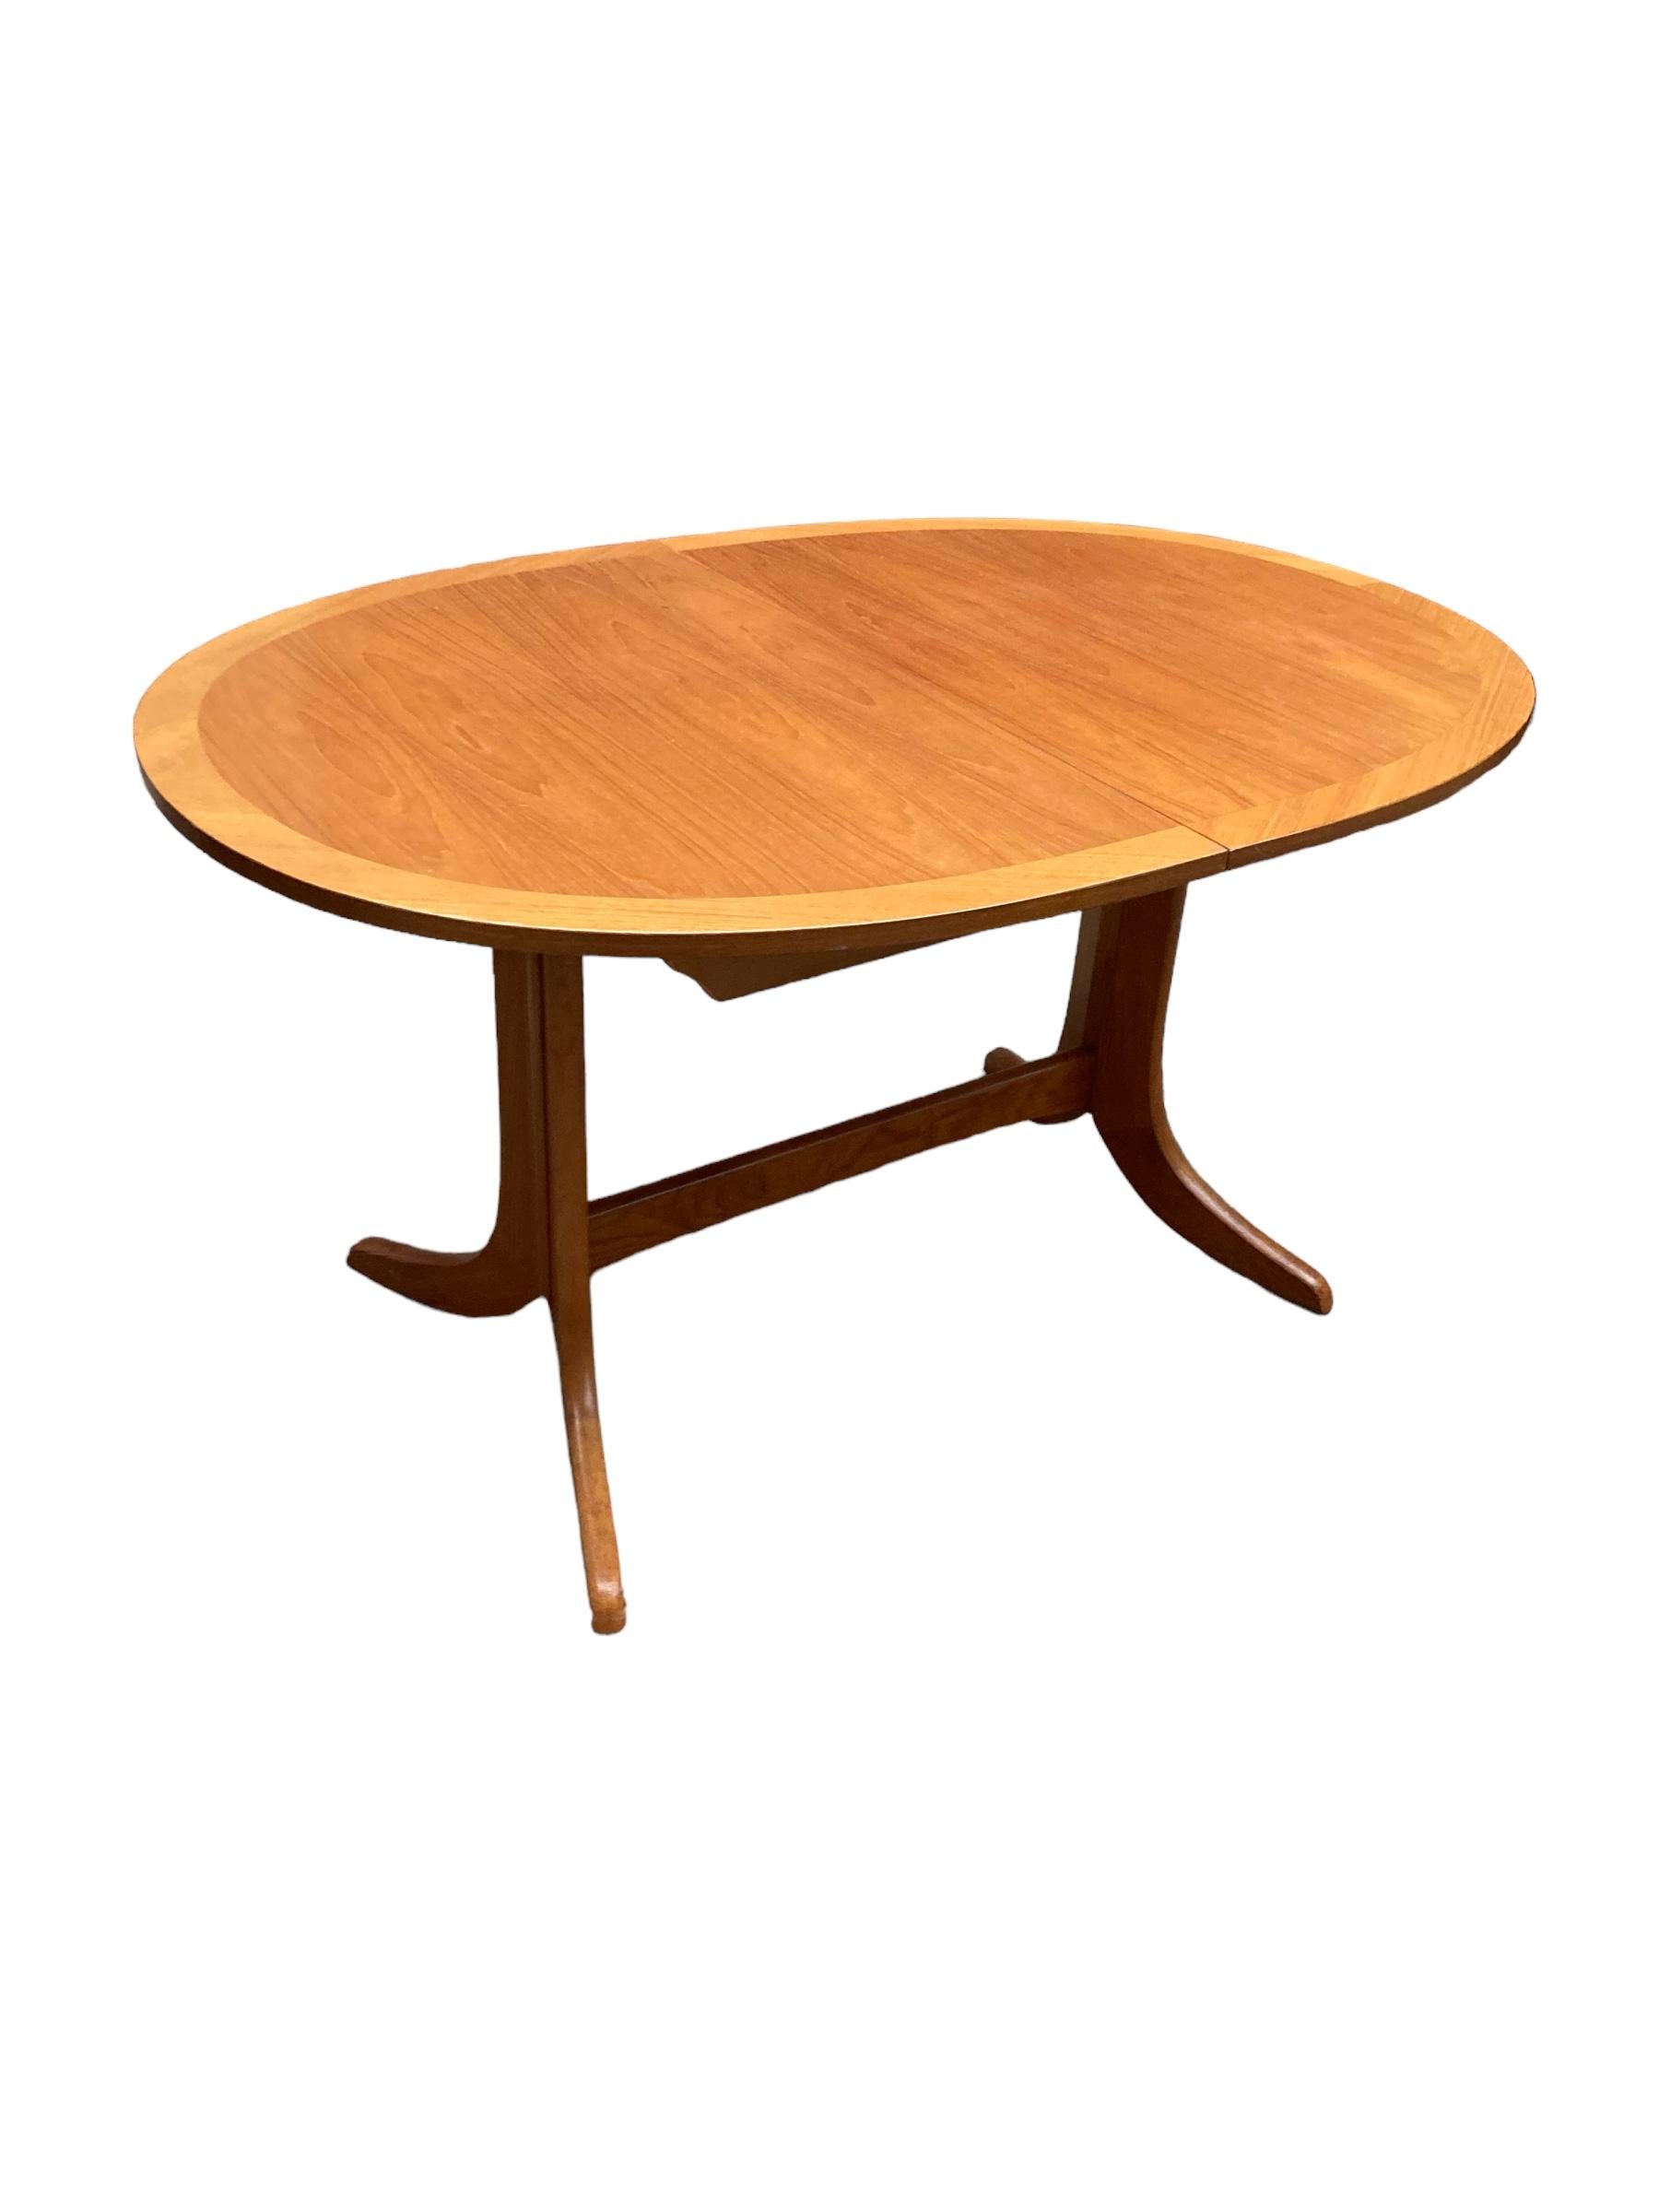 Introducing our exquisite extendable oval dining table with a beautifully crafted Teak top. This elegant piece of furniture is designed to enhance any dining space with its timeless appeal and generous size. The sturdy top not only adds warmth and